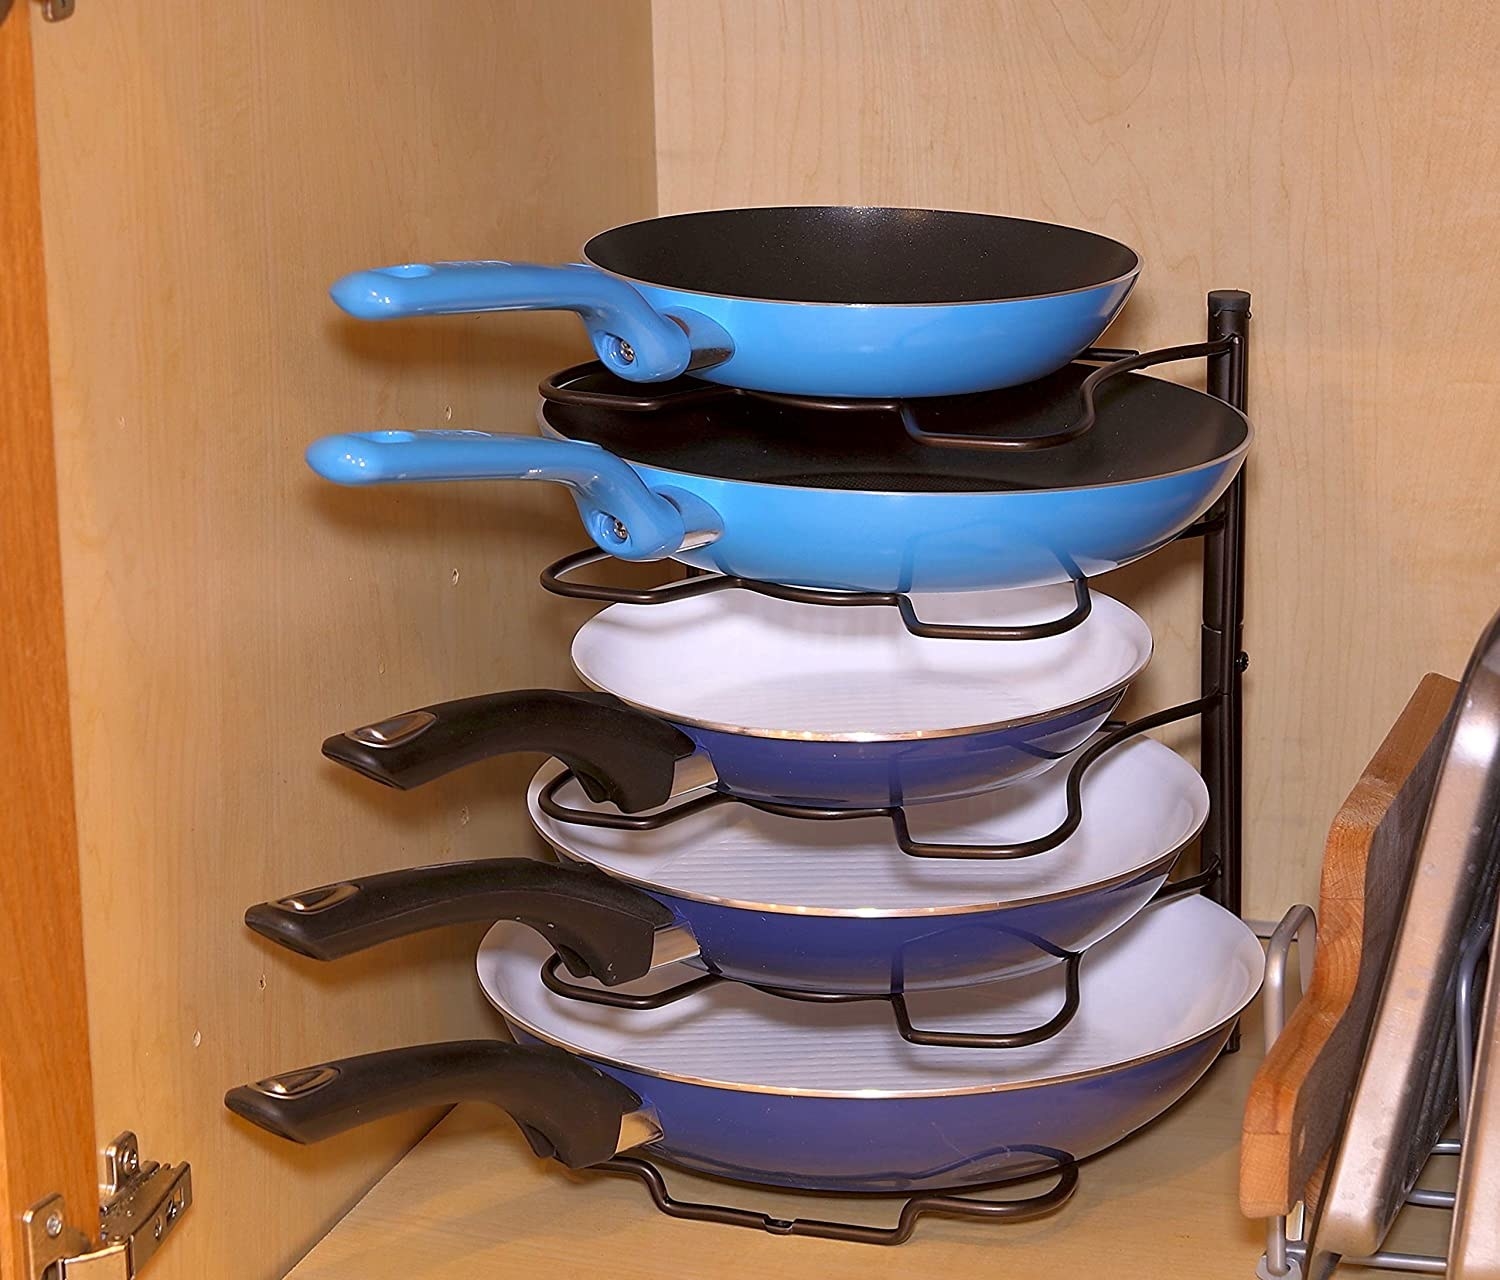 pan organizer holding five pans in a cupboard